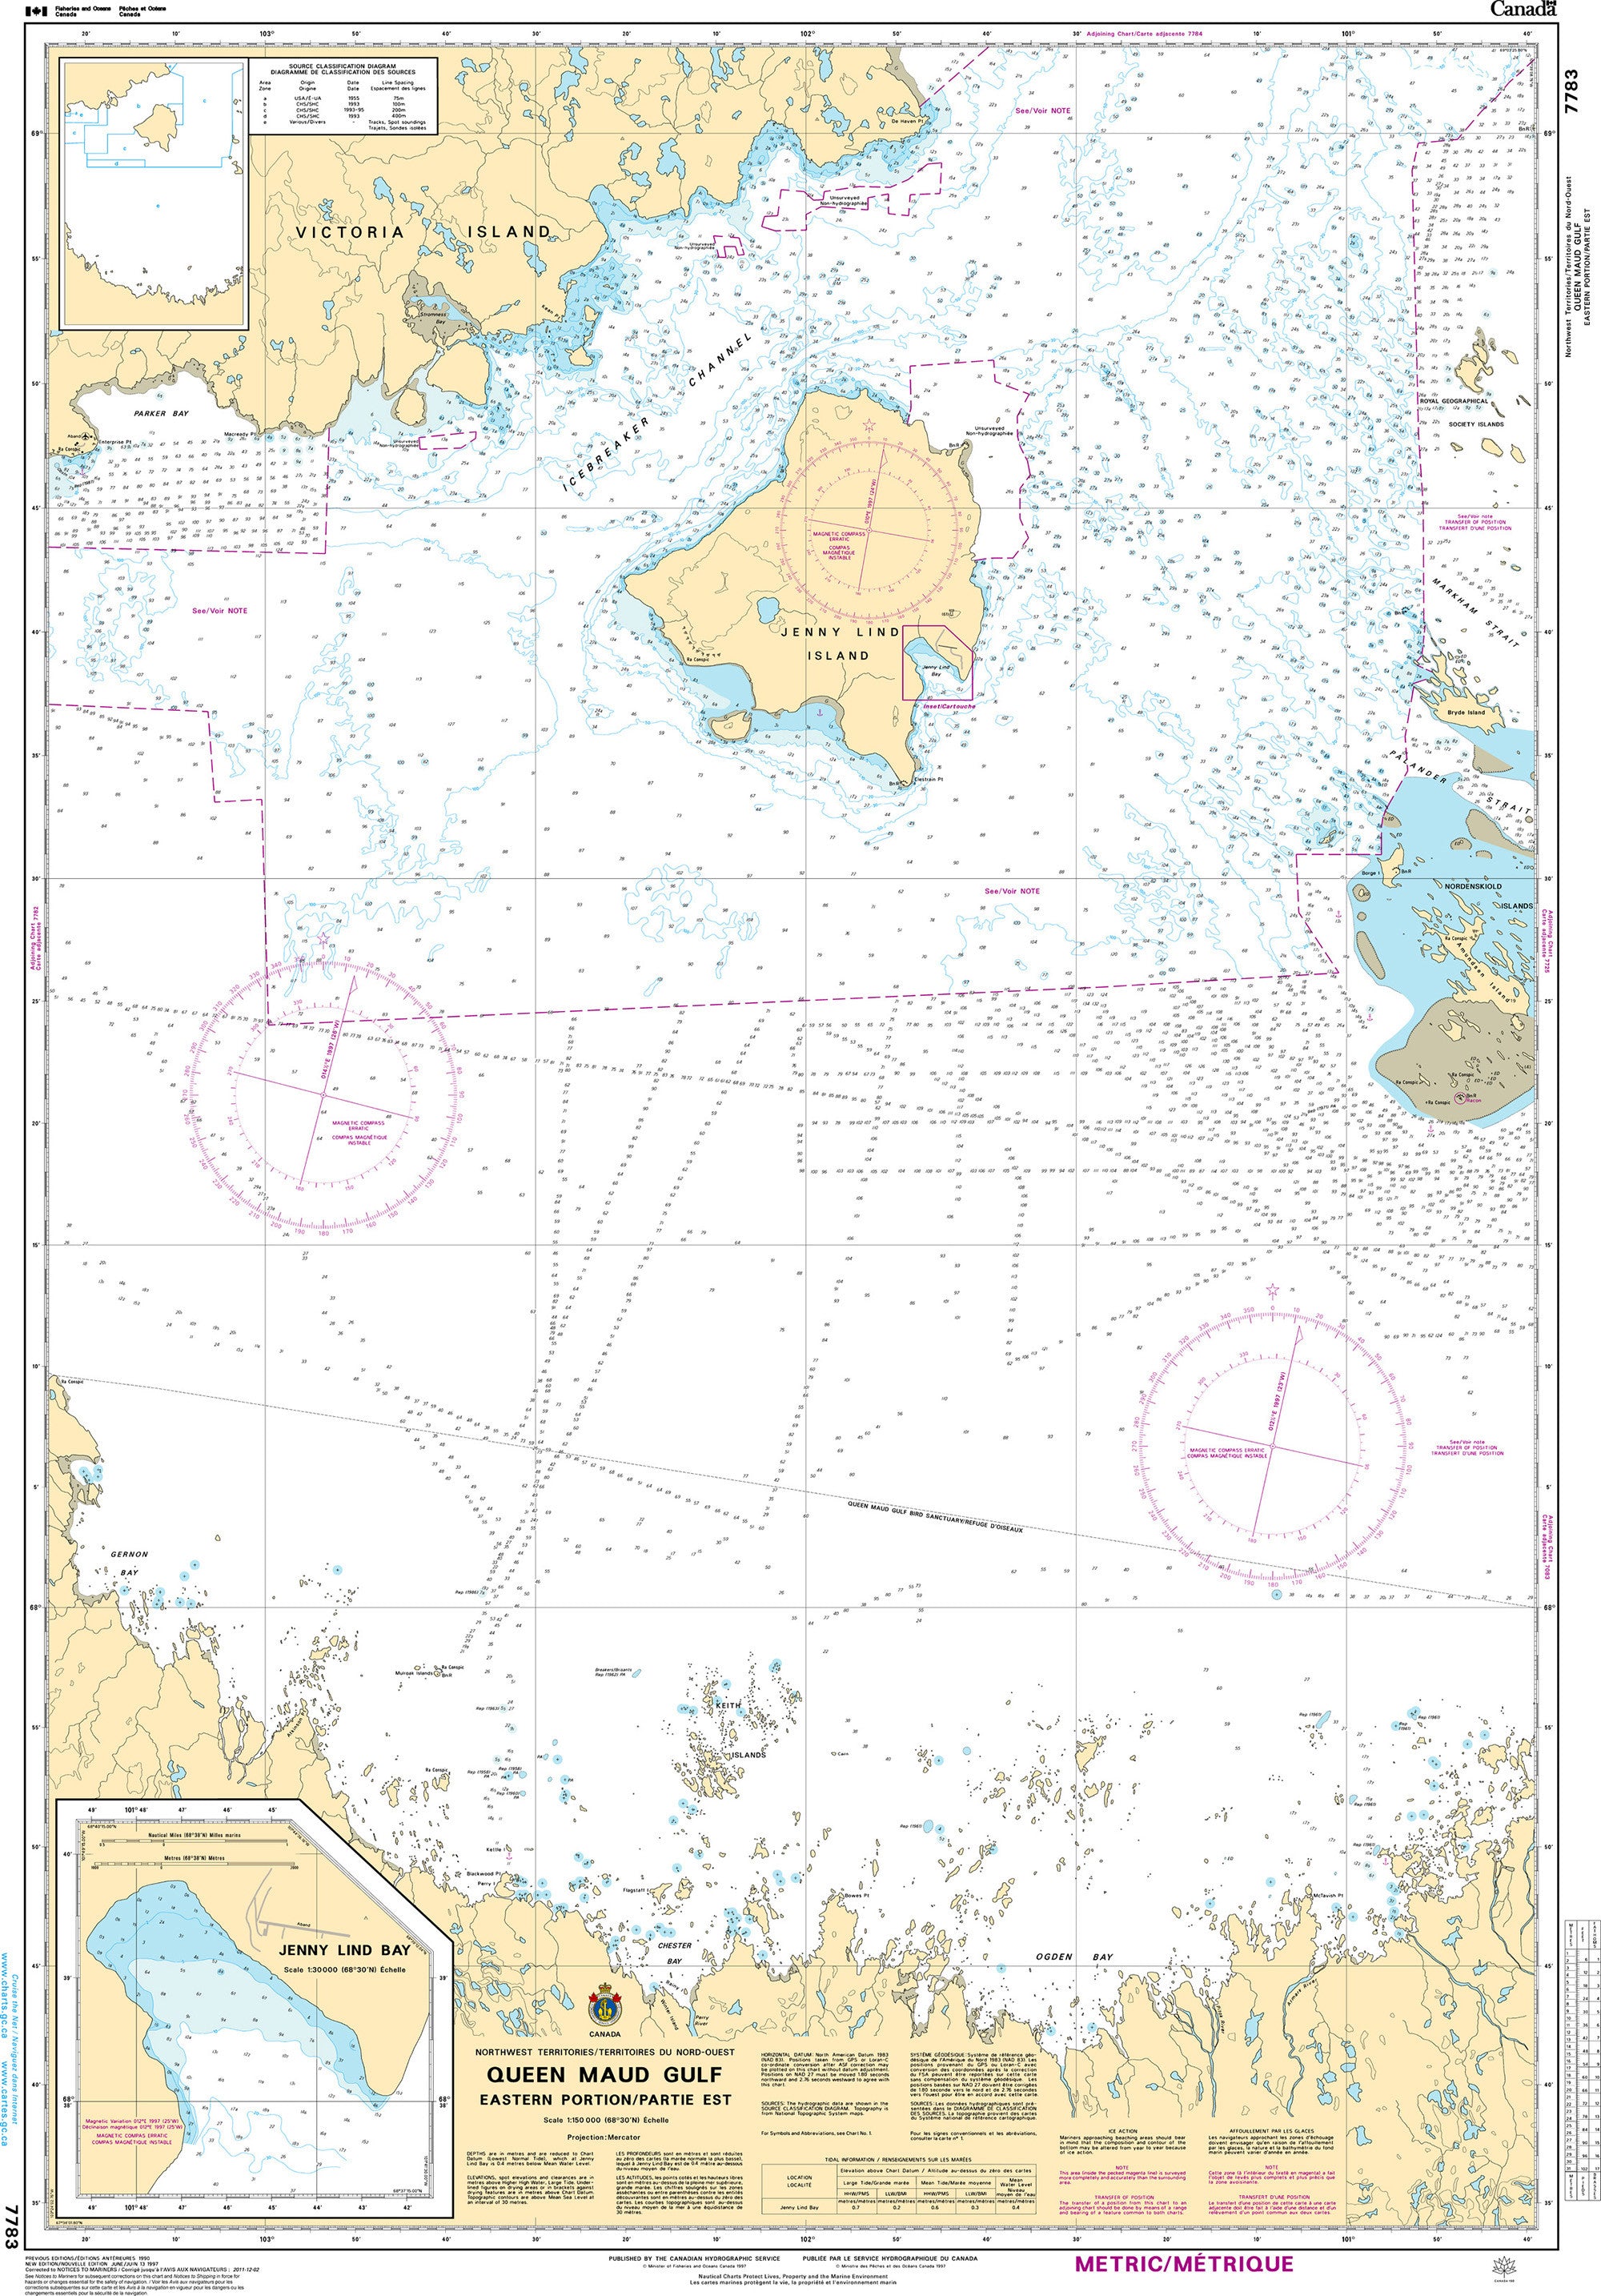 Canadian Hydrographic Service Nautical Chart CHS7783: Queen Maud Gulf Eastern Portion/Partie est